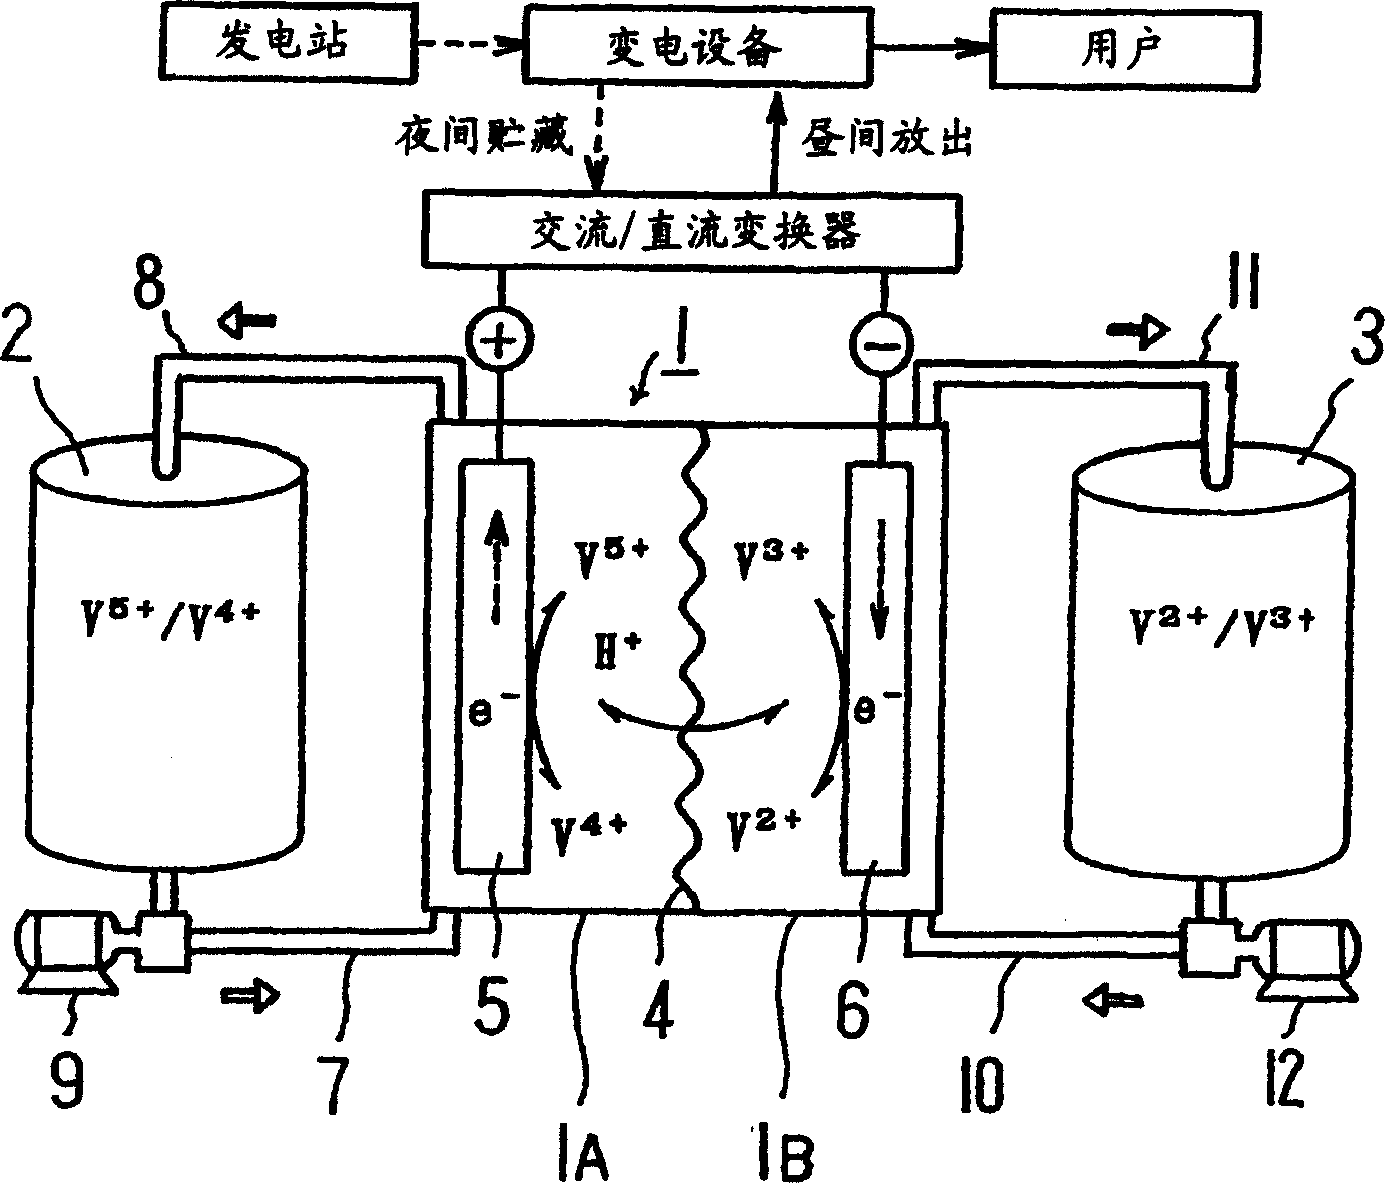 Redox-flow cell electrolyte and redox-flow cell